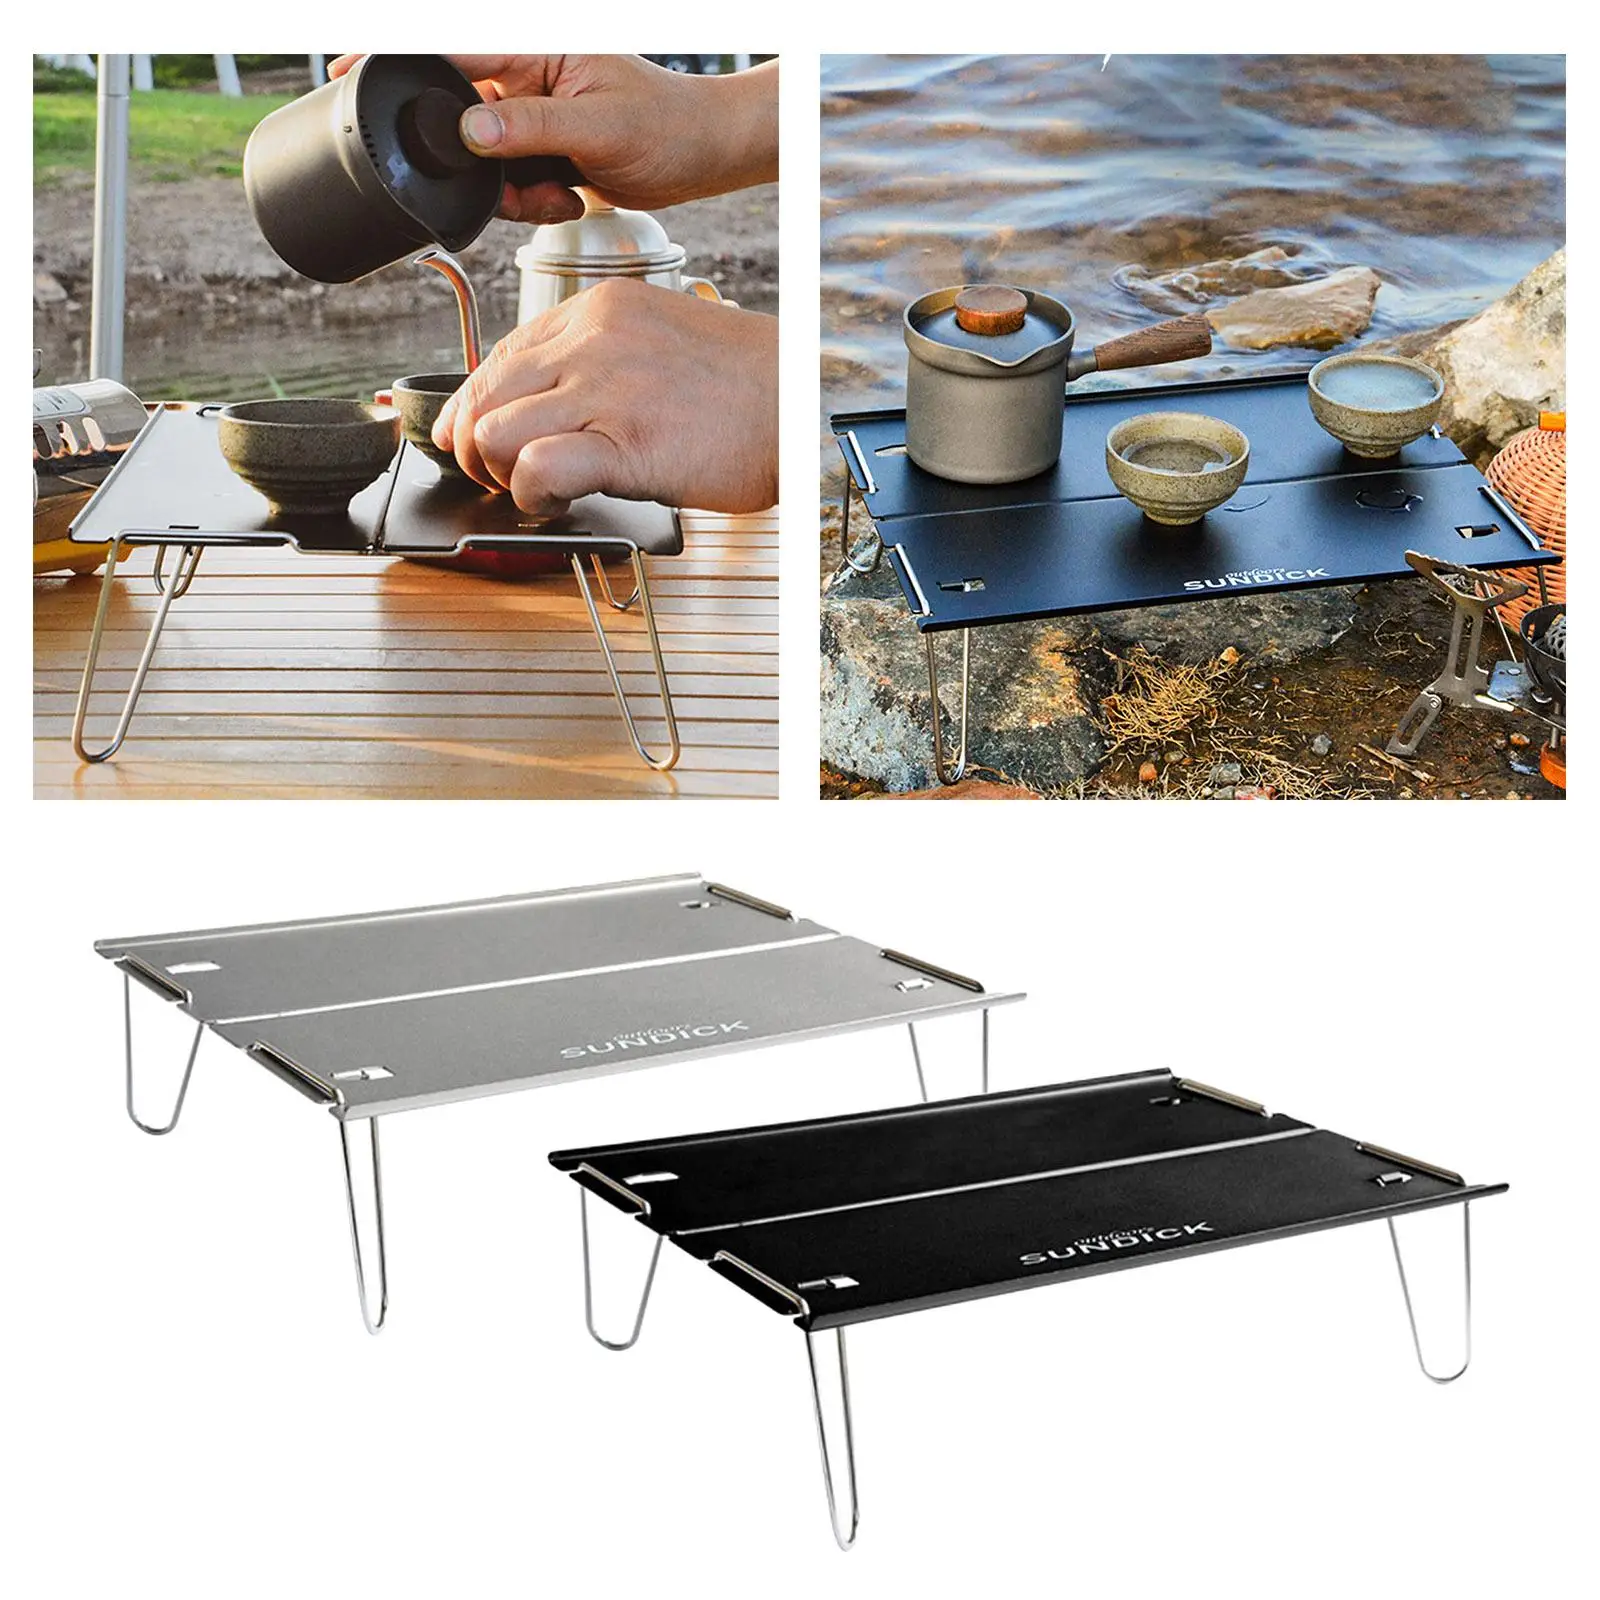 Outdoor Folding Table Camping Aluminium Alloy Picnic Table Waterproof -light Durable Foldable Table Desk